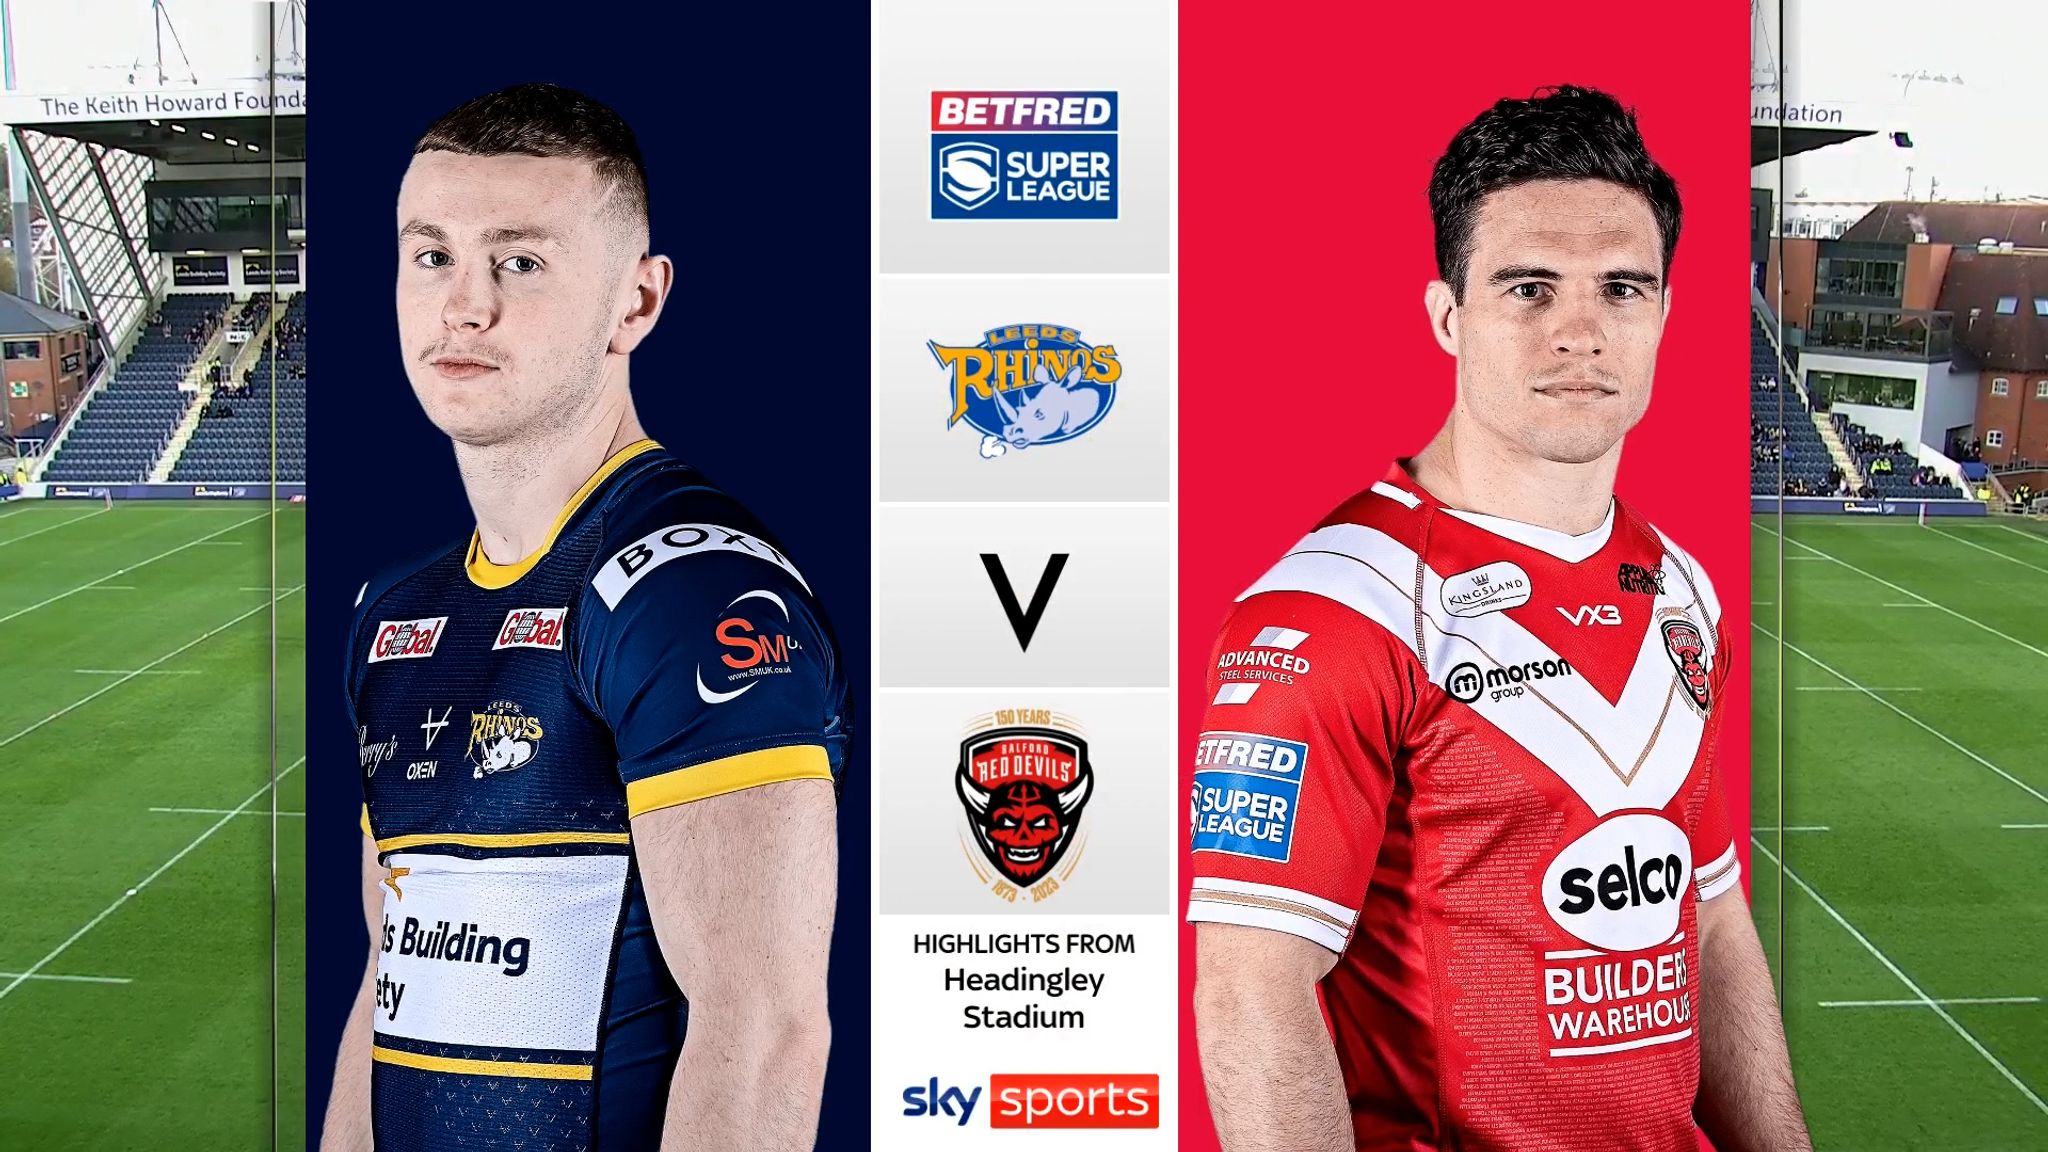 Leeds Rhinos 12-22 Salford Red Devils Super League highlights Video Watch TV Show Sky Sports